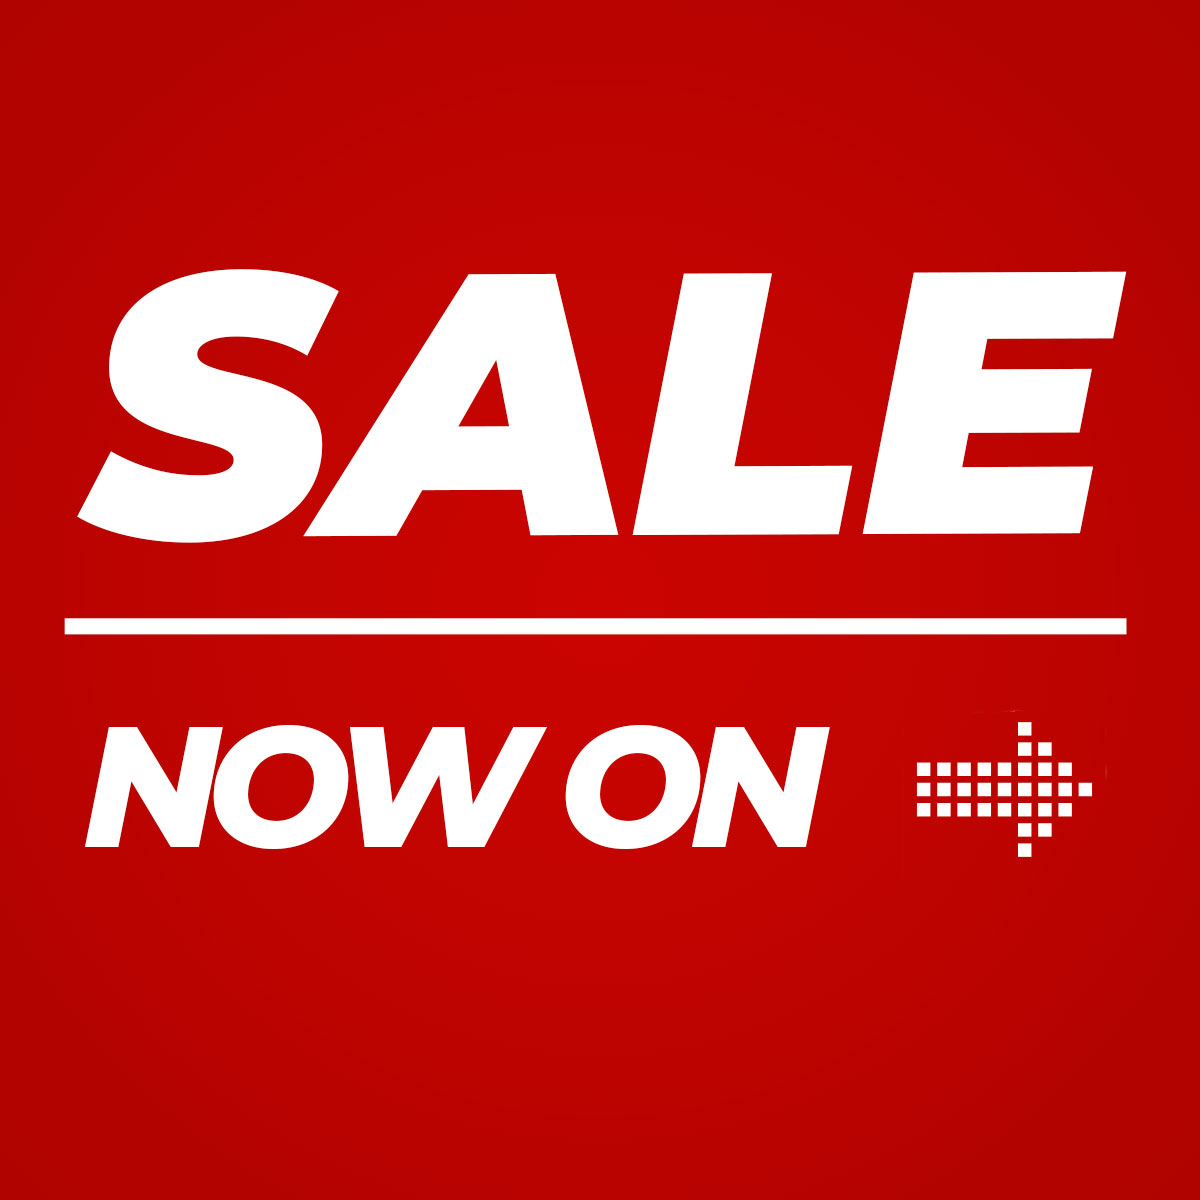 Sale now on!